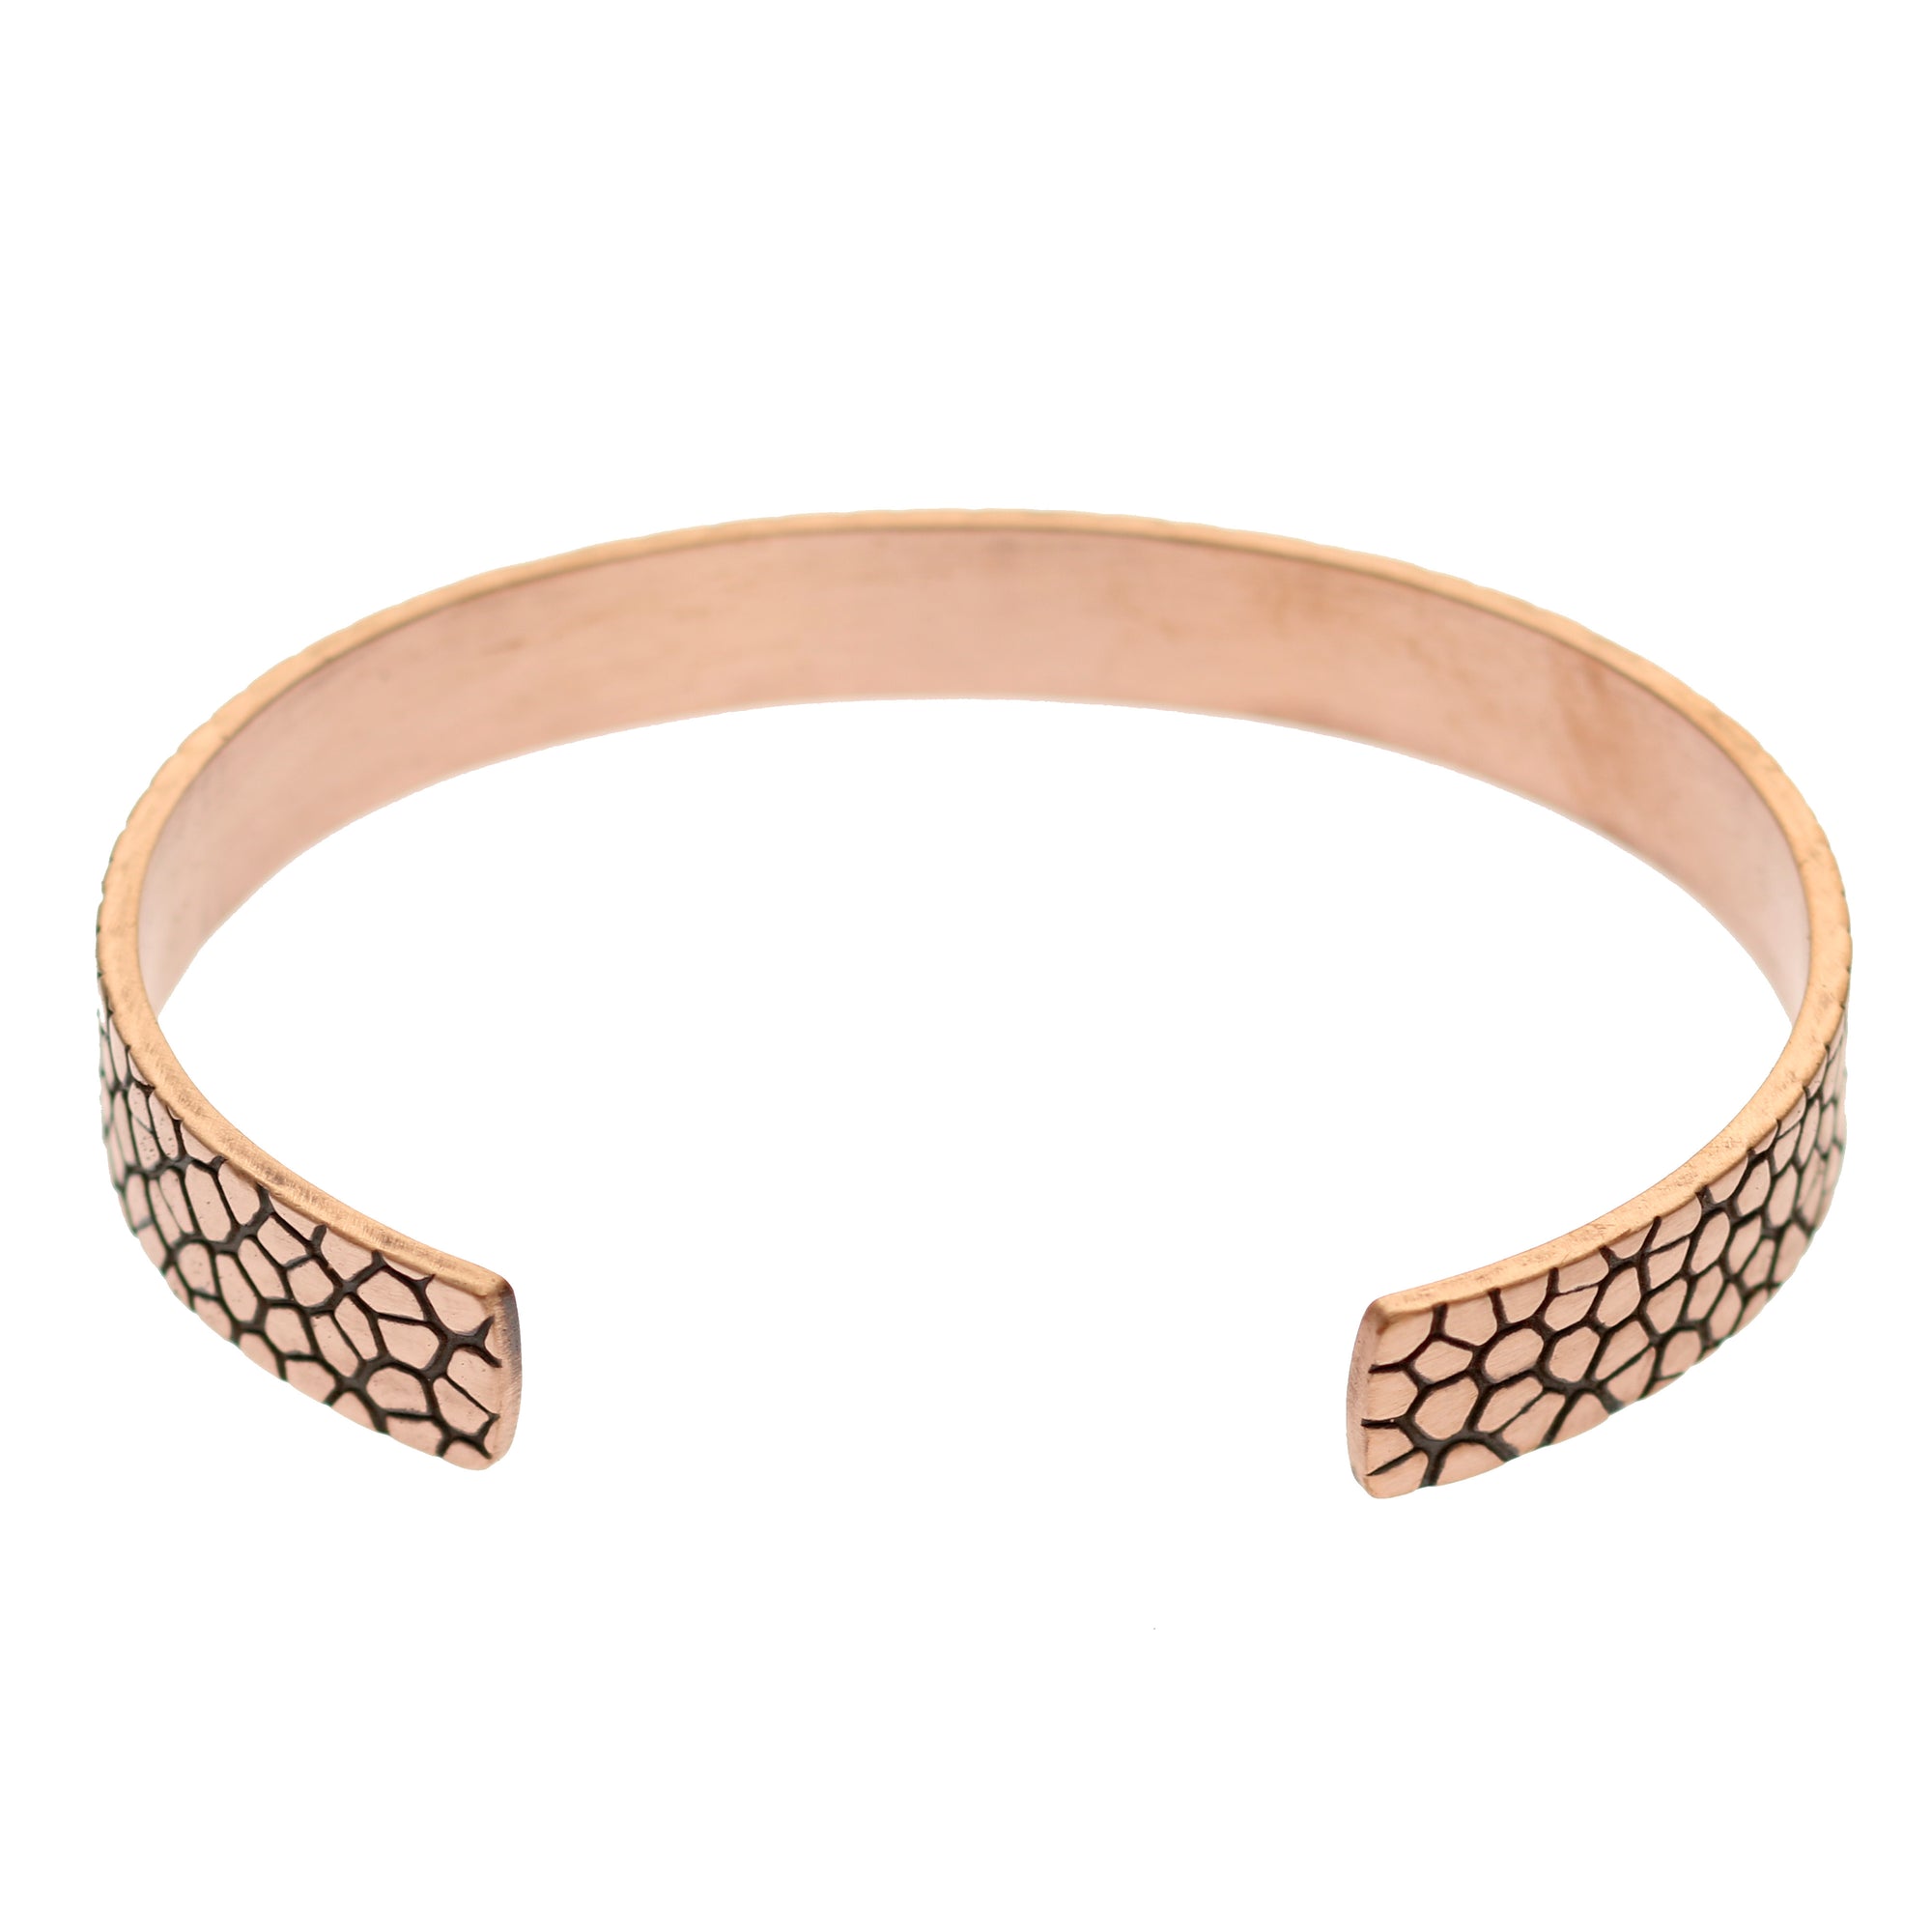 Opening of Men's 10 MM Wide Embossed Snakeskin Solid Copper Cuff 